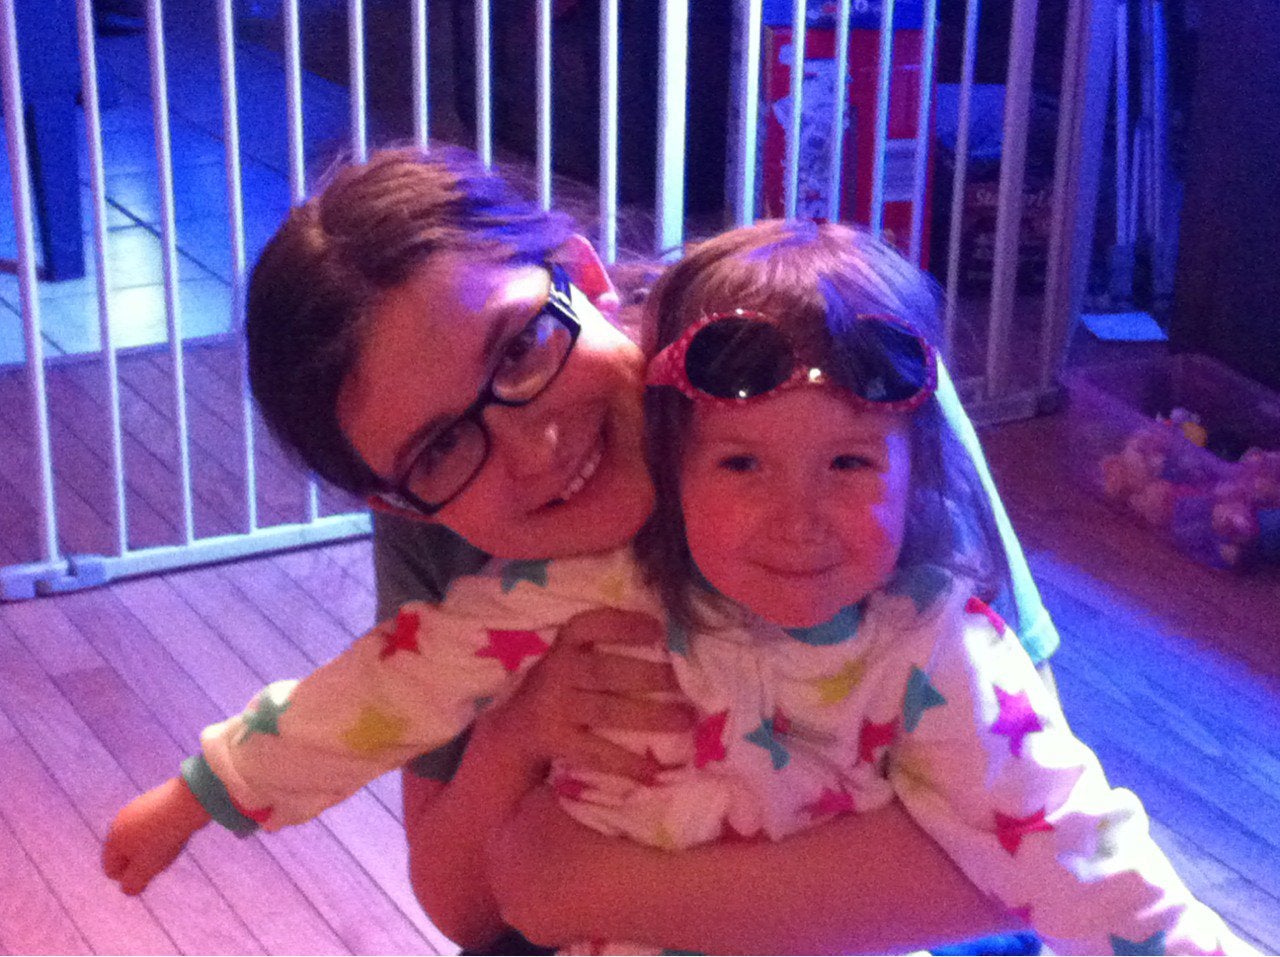 My 2 1/2 year old autistic daughter smiling in a photo for ...